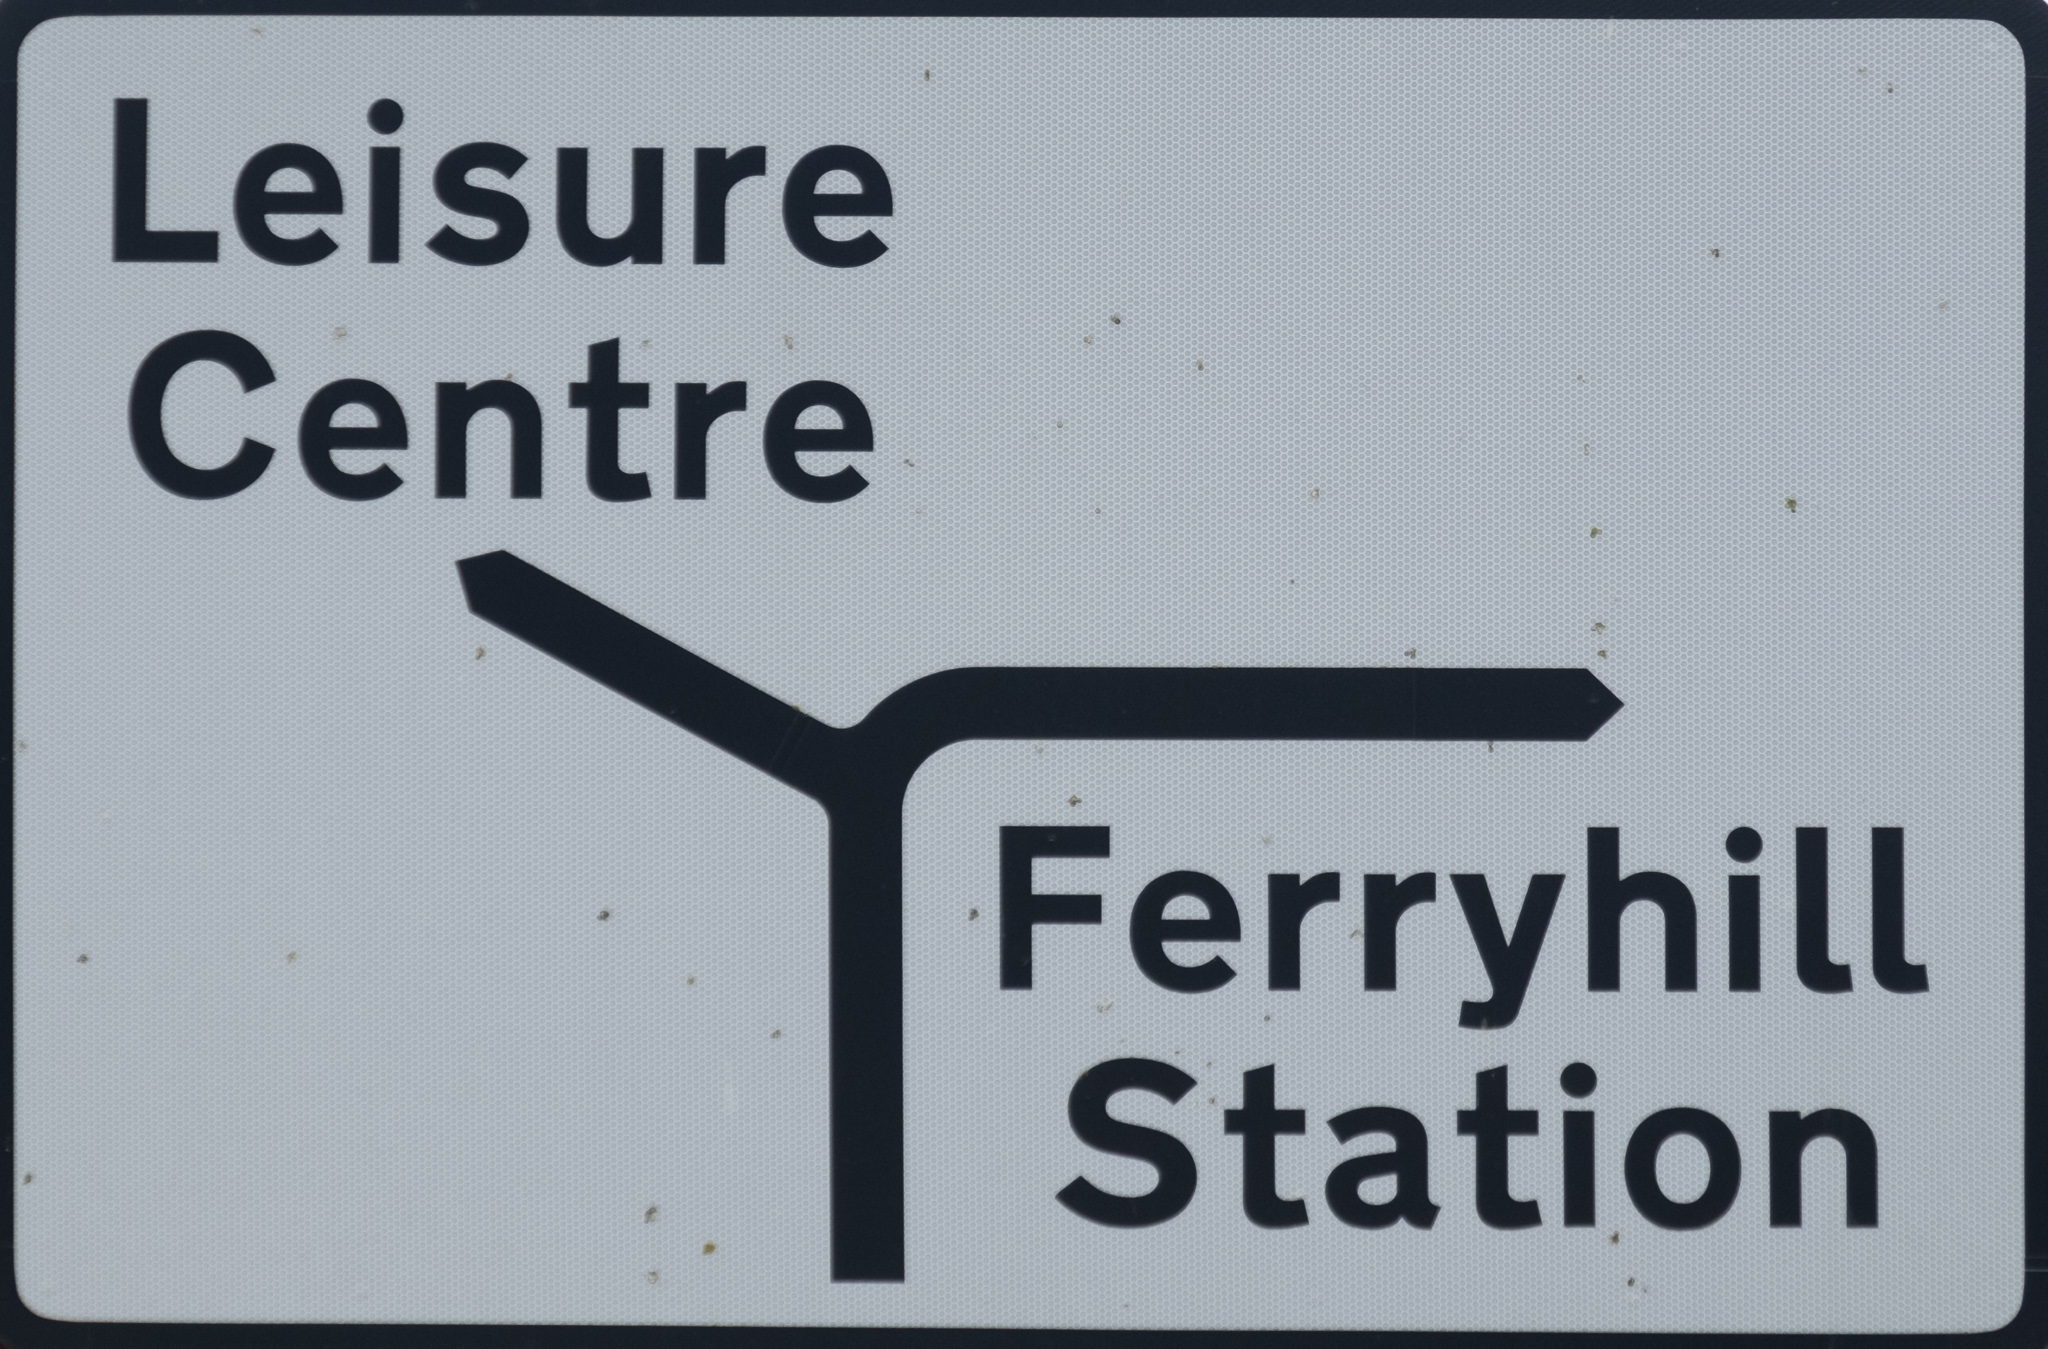 Ferryhill Station still exists on road signs. What we need now is an actual station to serve the many potential passengers